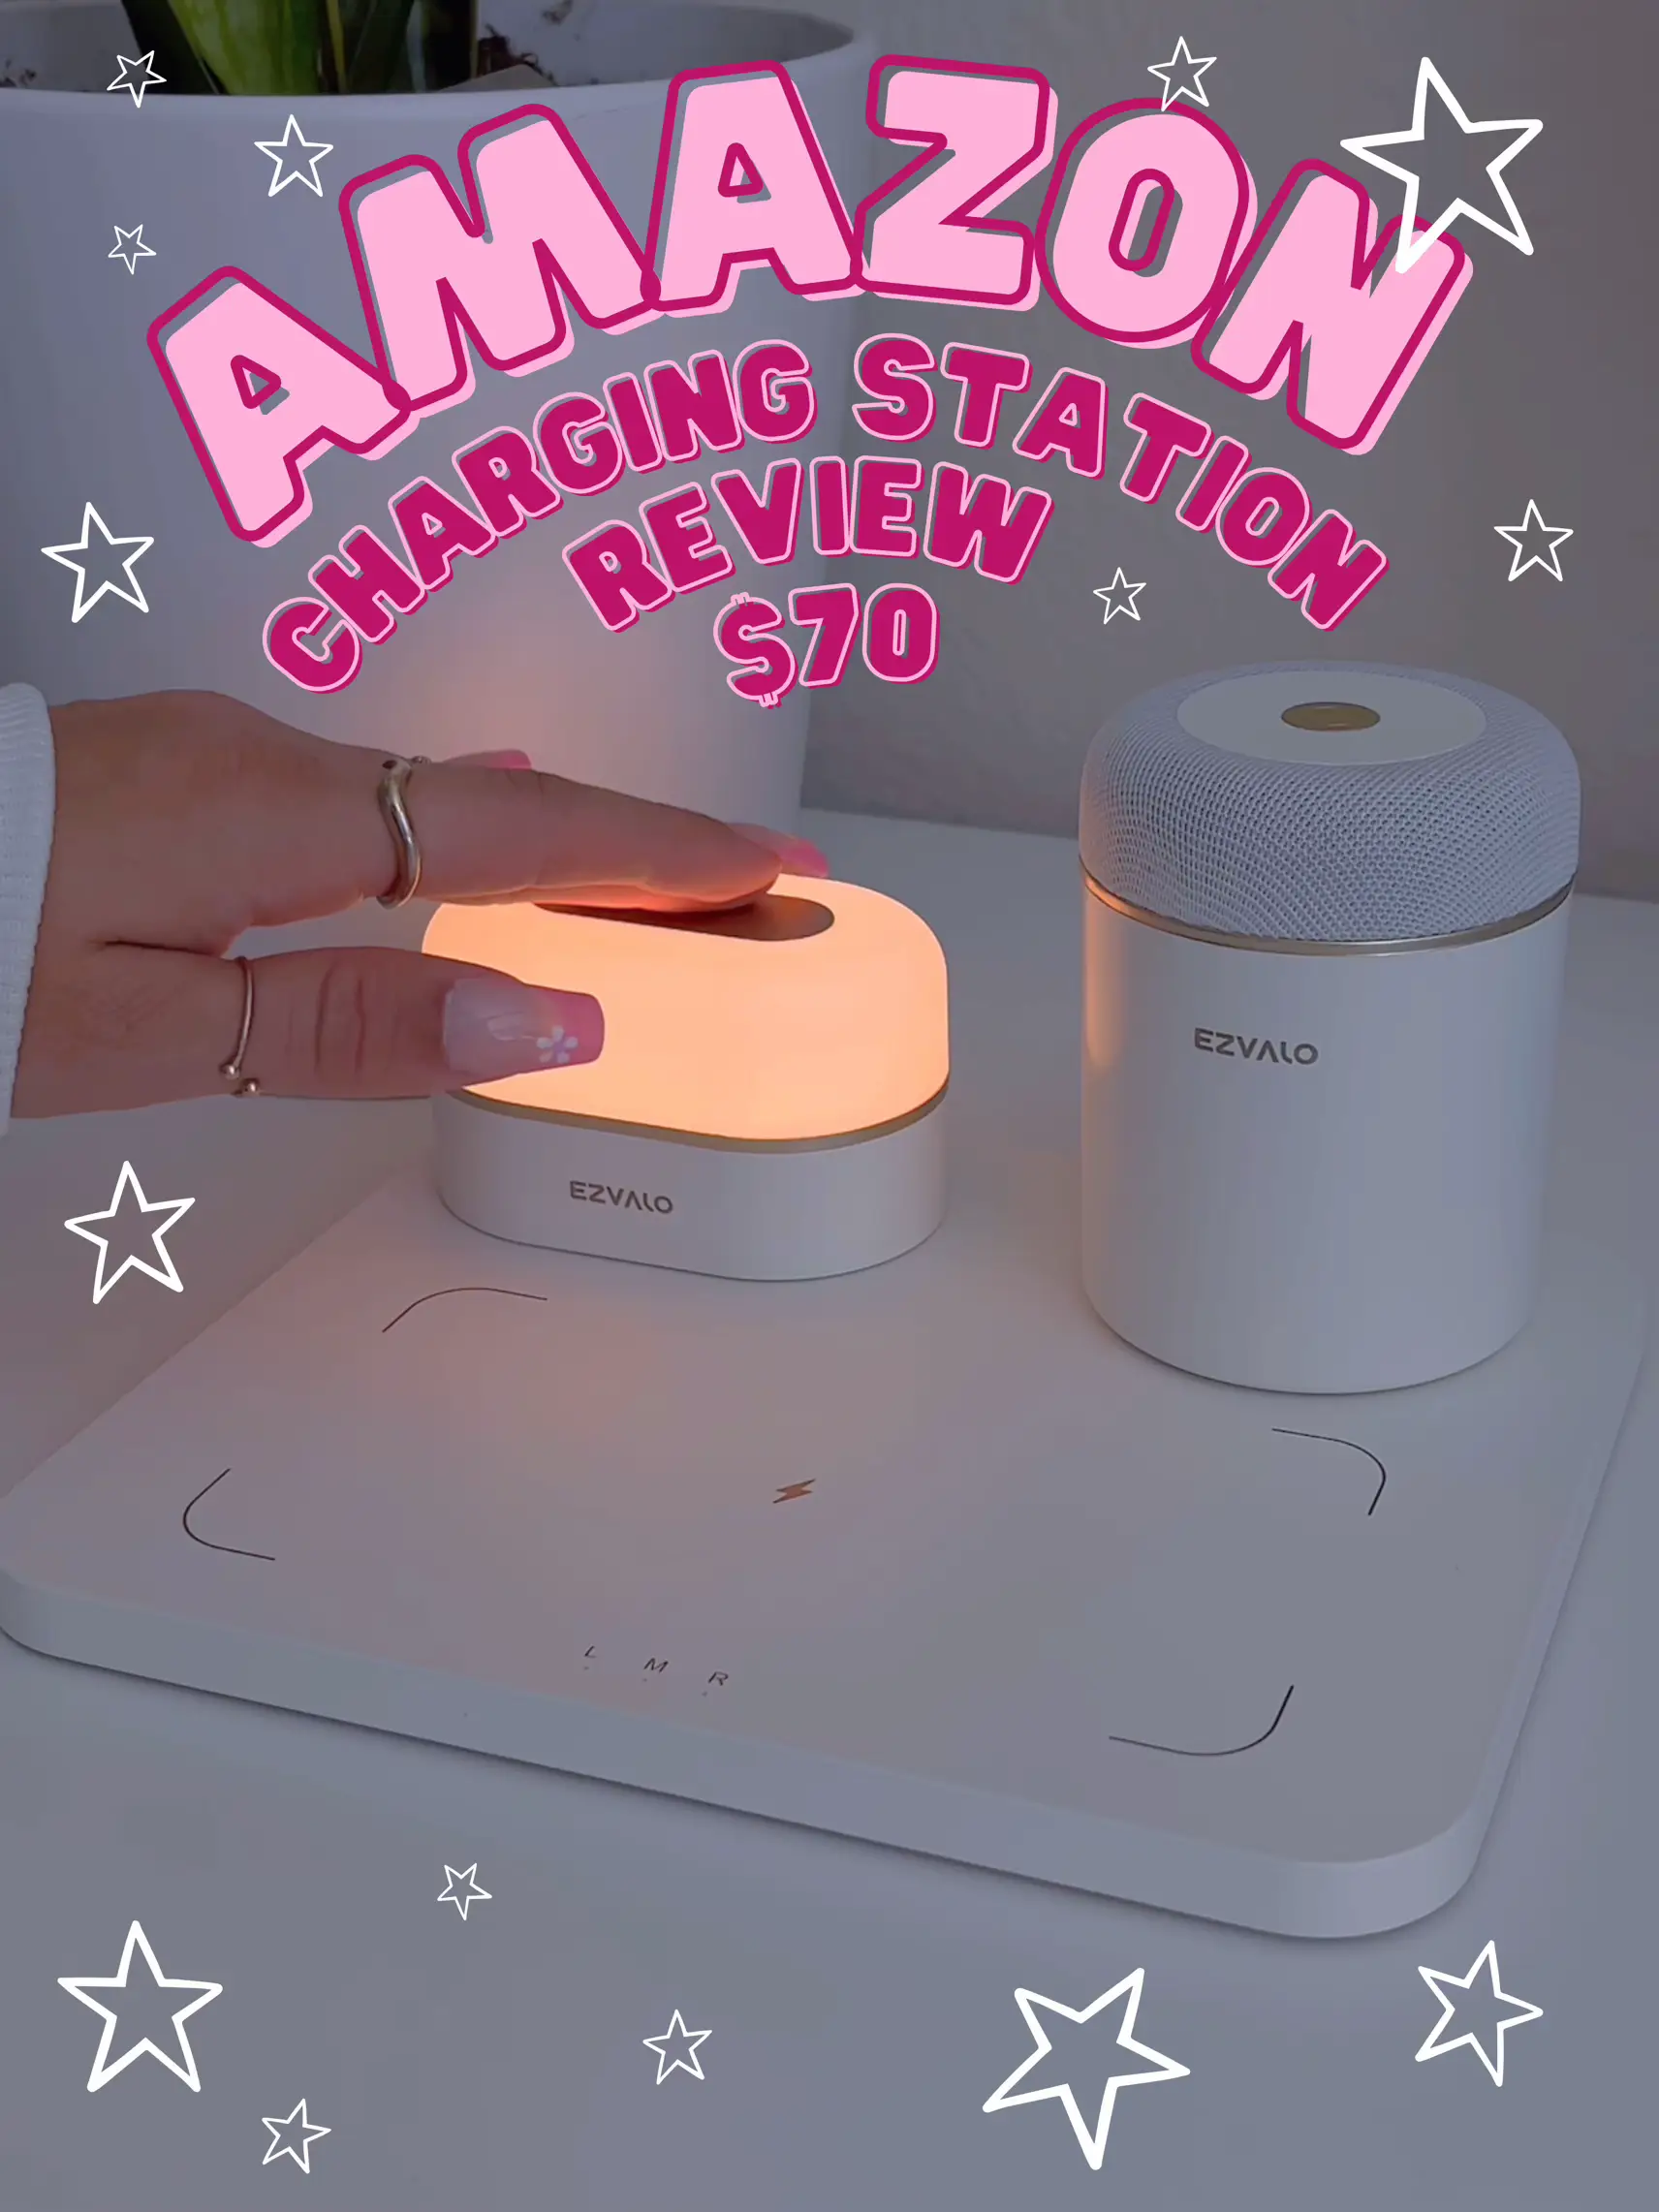 ⚡ Ezvalo Charging Station Review